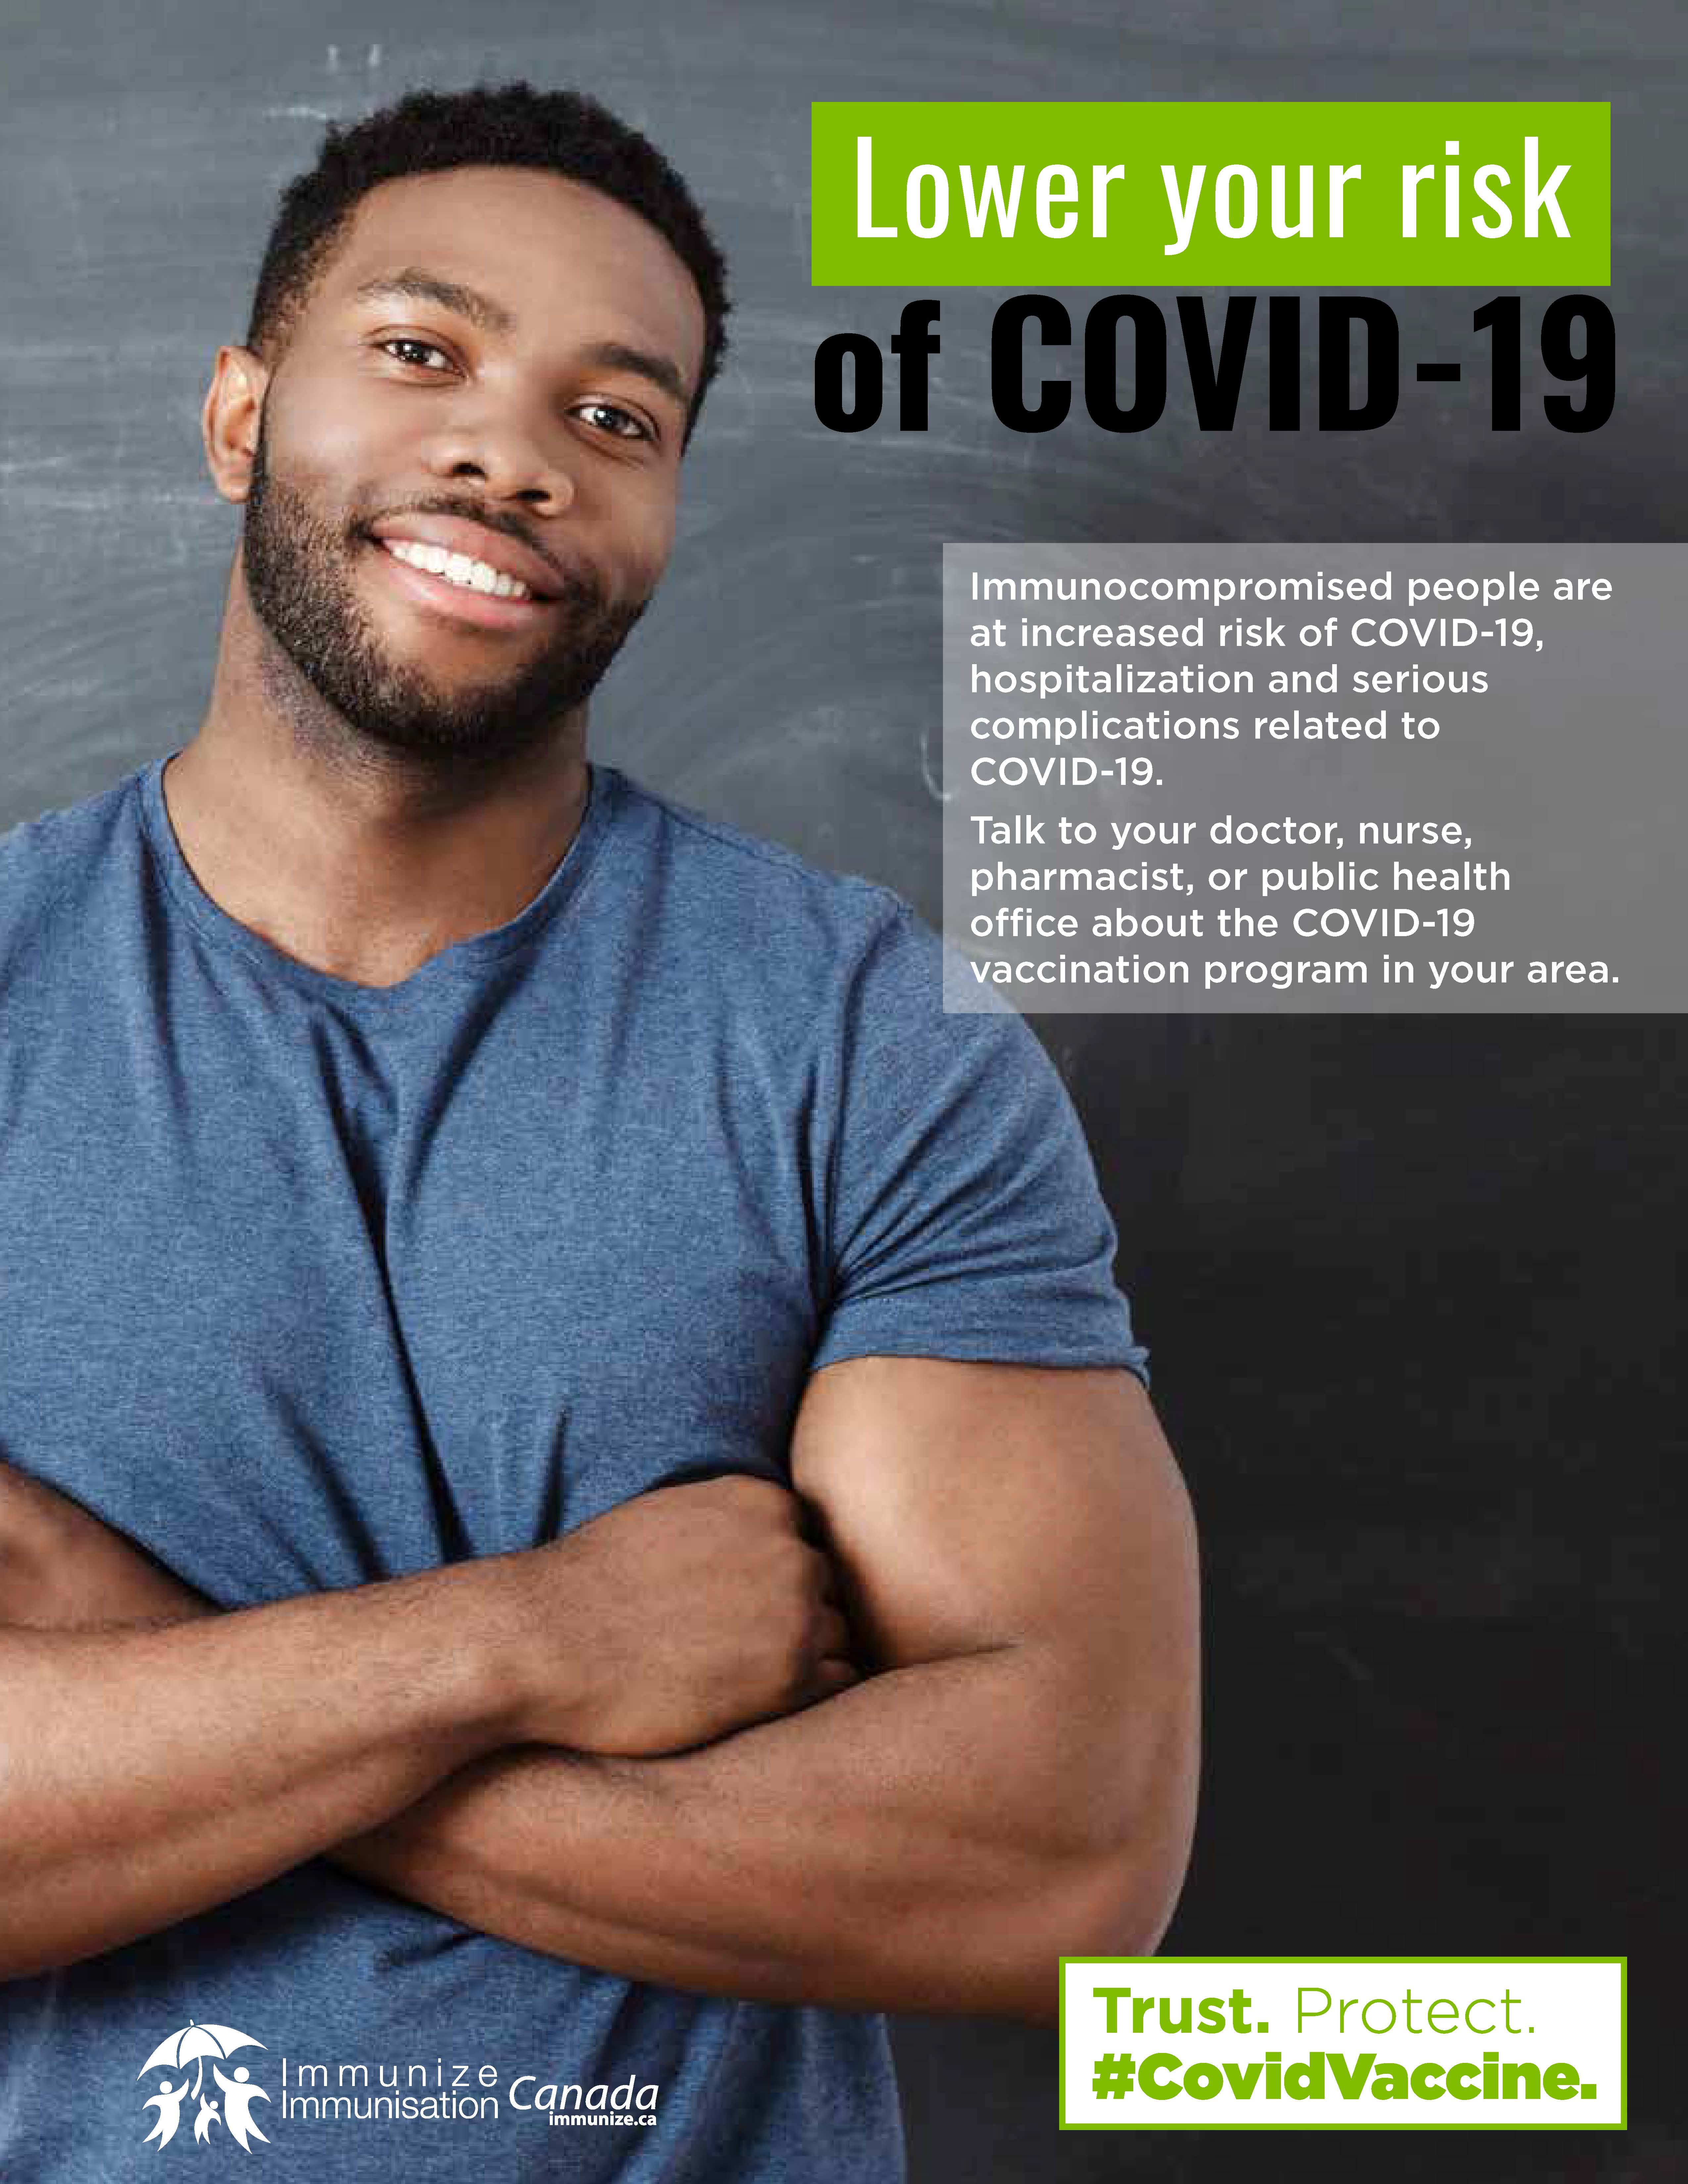 Lower your risk of COVID-19